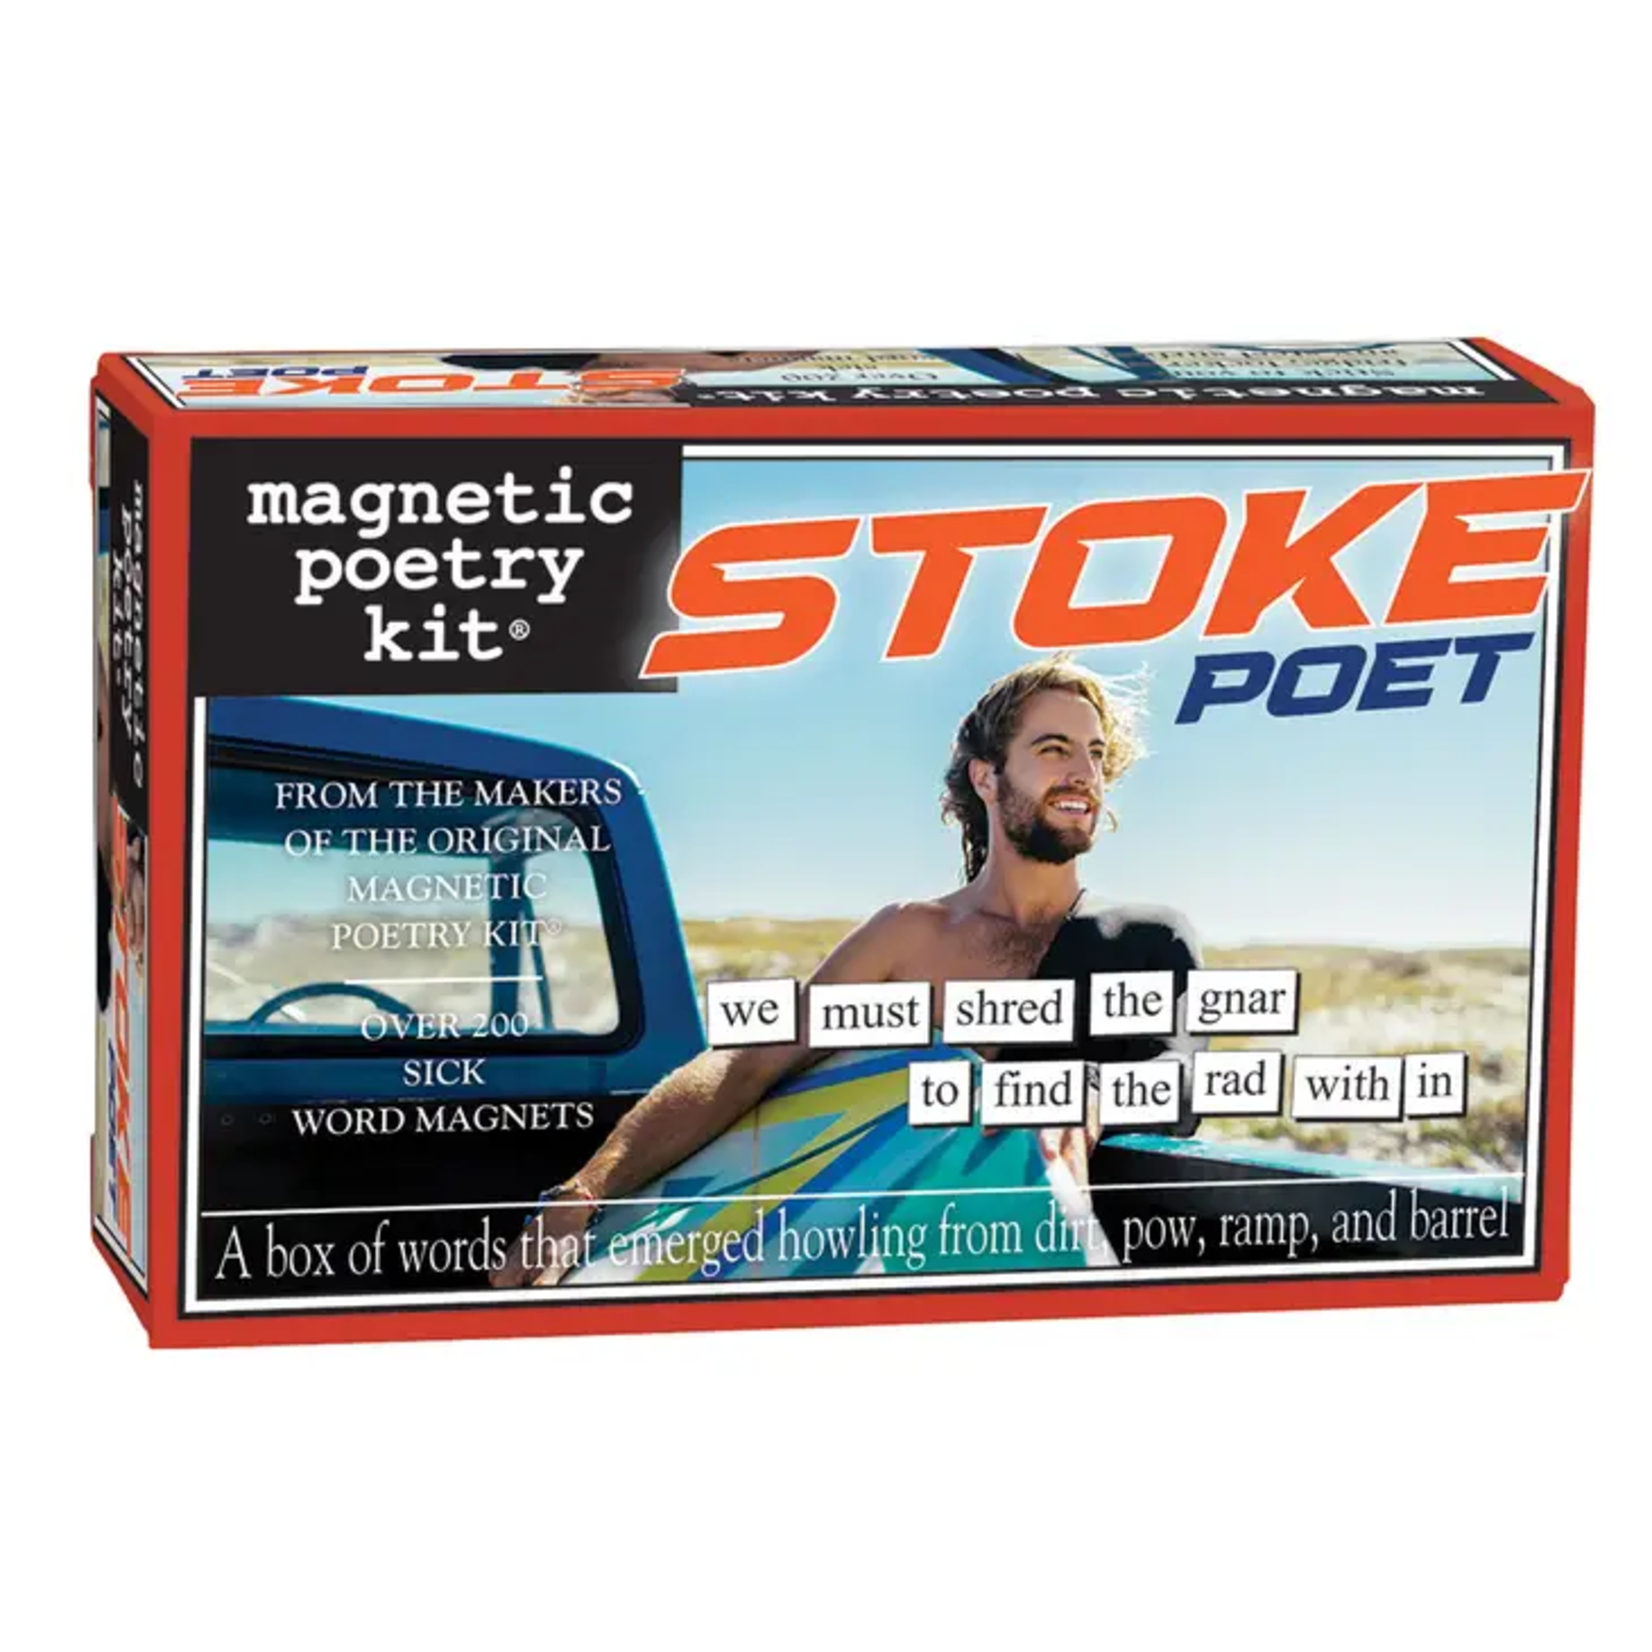 Magnetic Poetry Stoke Poet Magnets